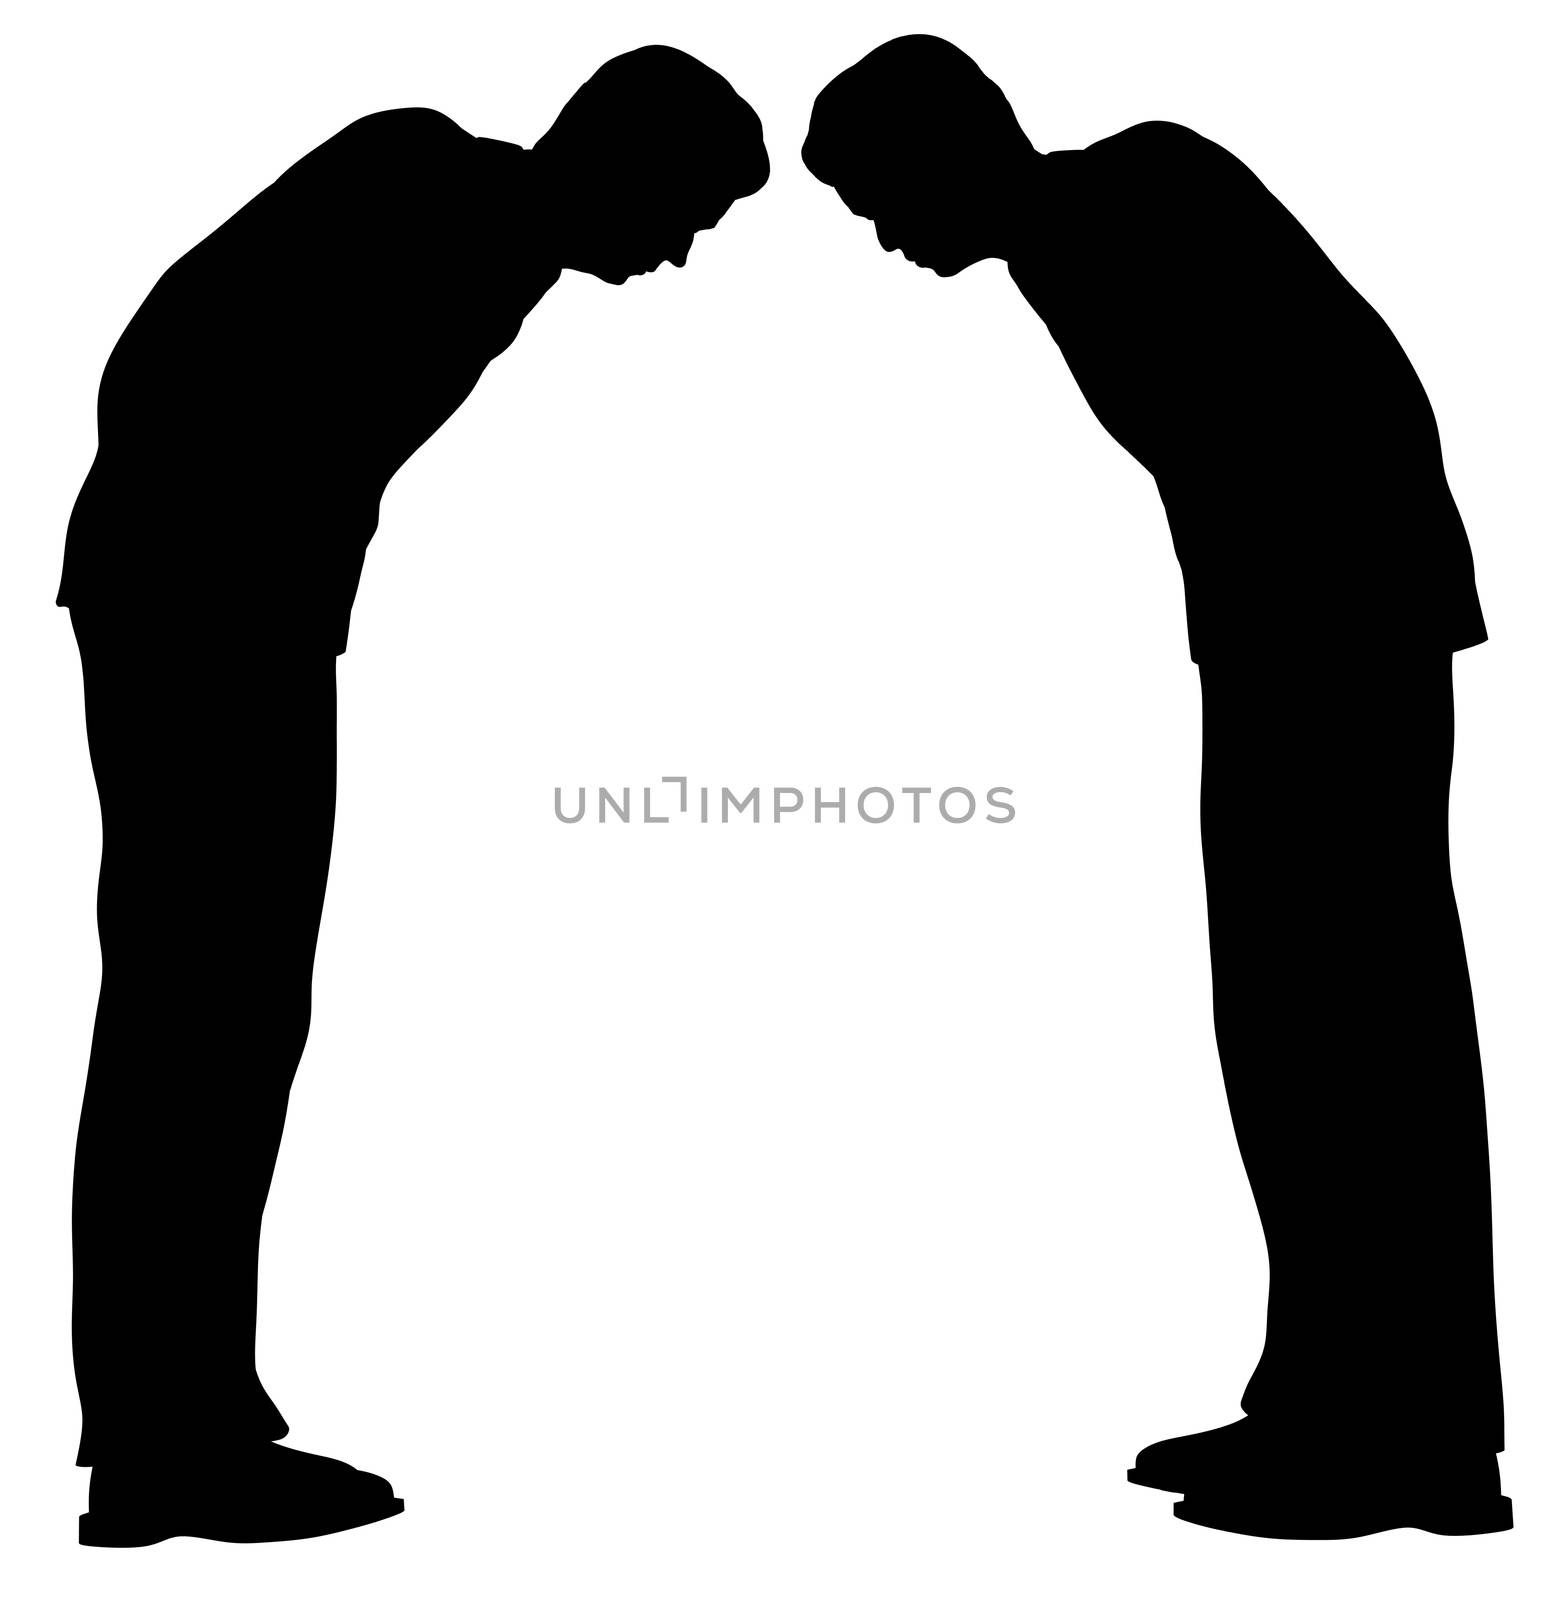 Illustration of two business men greeting one another